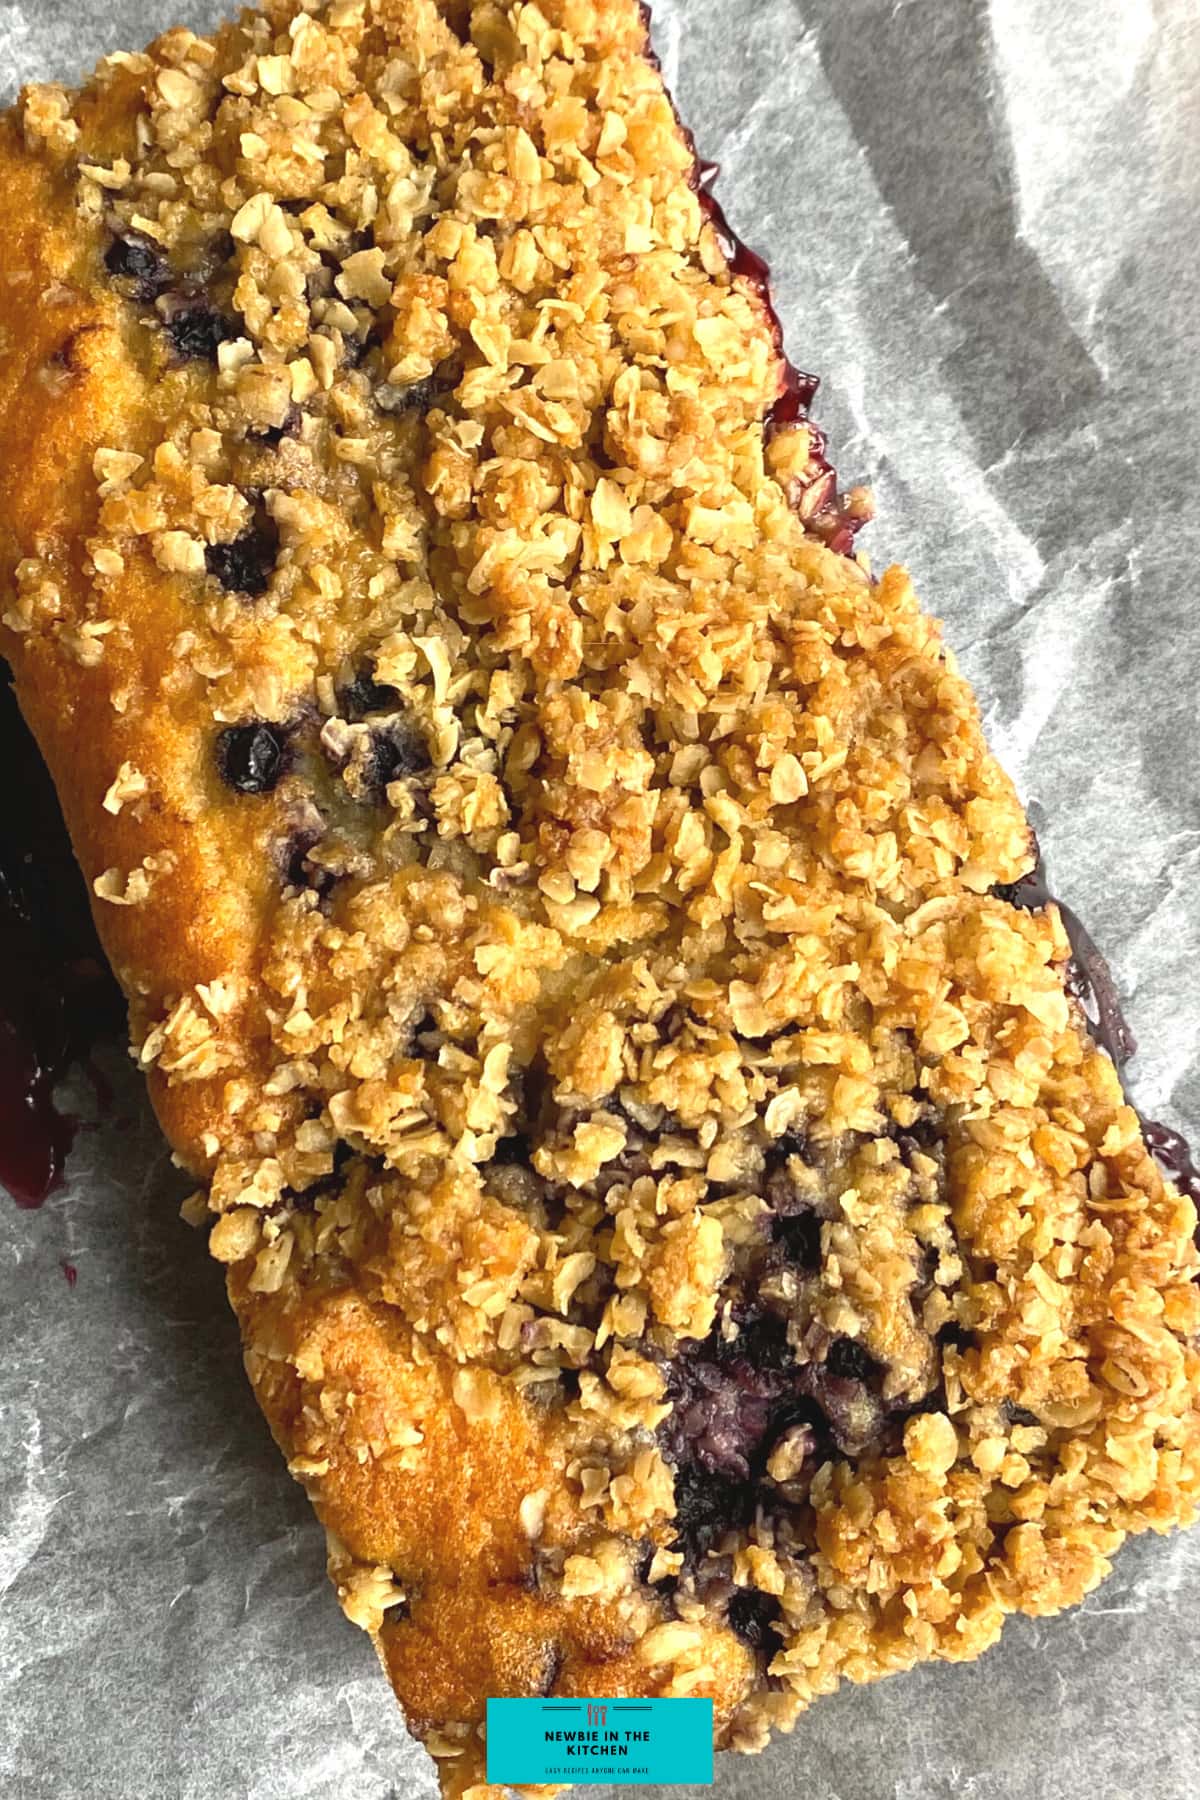 Easy Blueberry and Lemon Crumble Cake. Deliciously soft & moist cake packed with blueberries & a hint of lemon. Topped with a crumble topping. Easiest simple cake recipe ever!